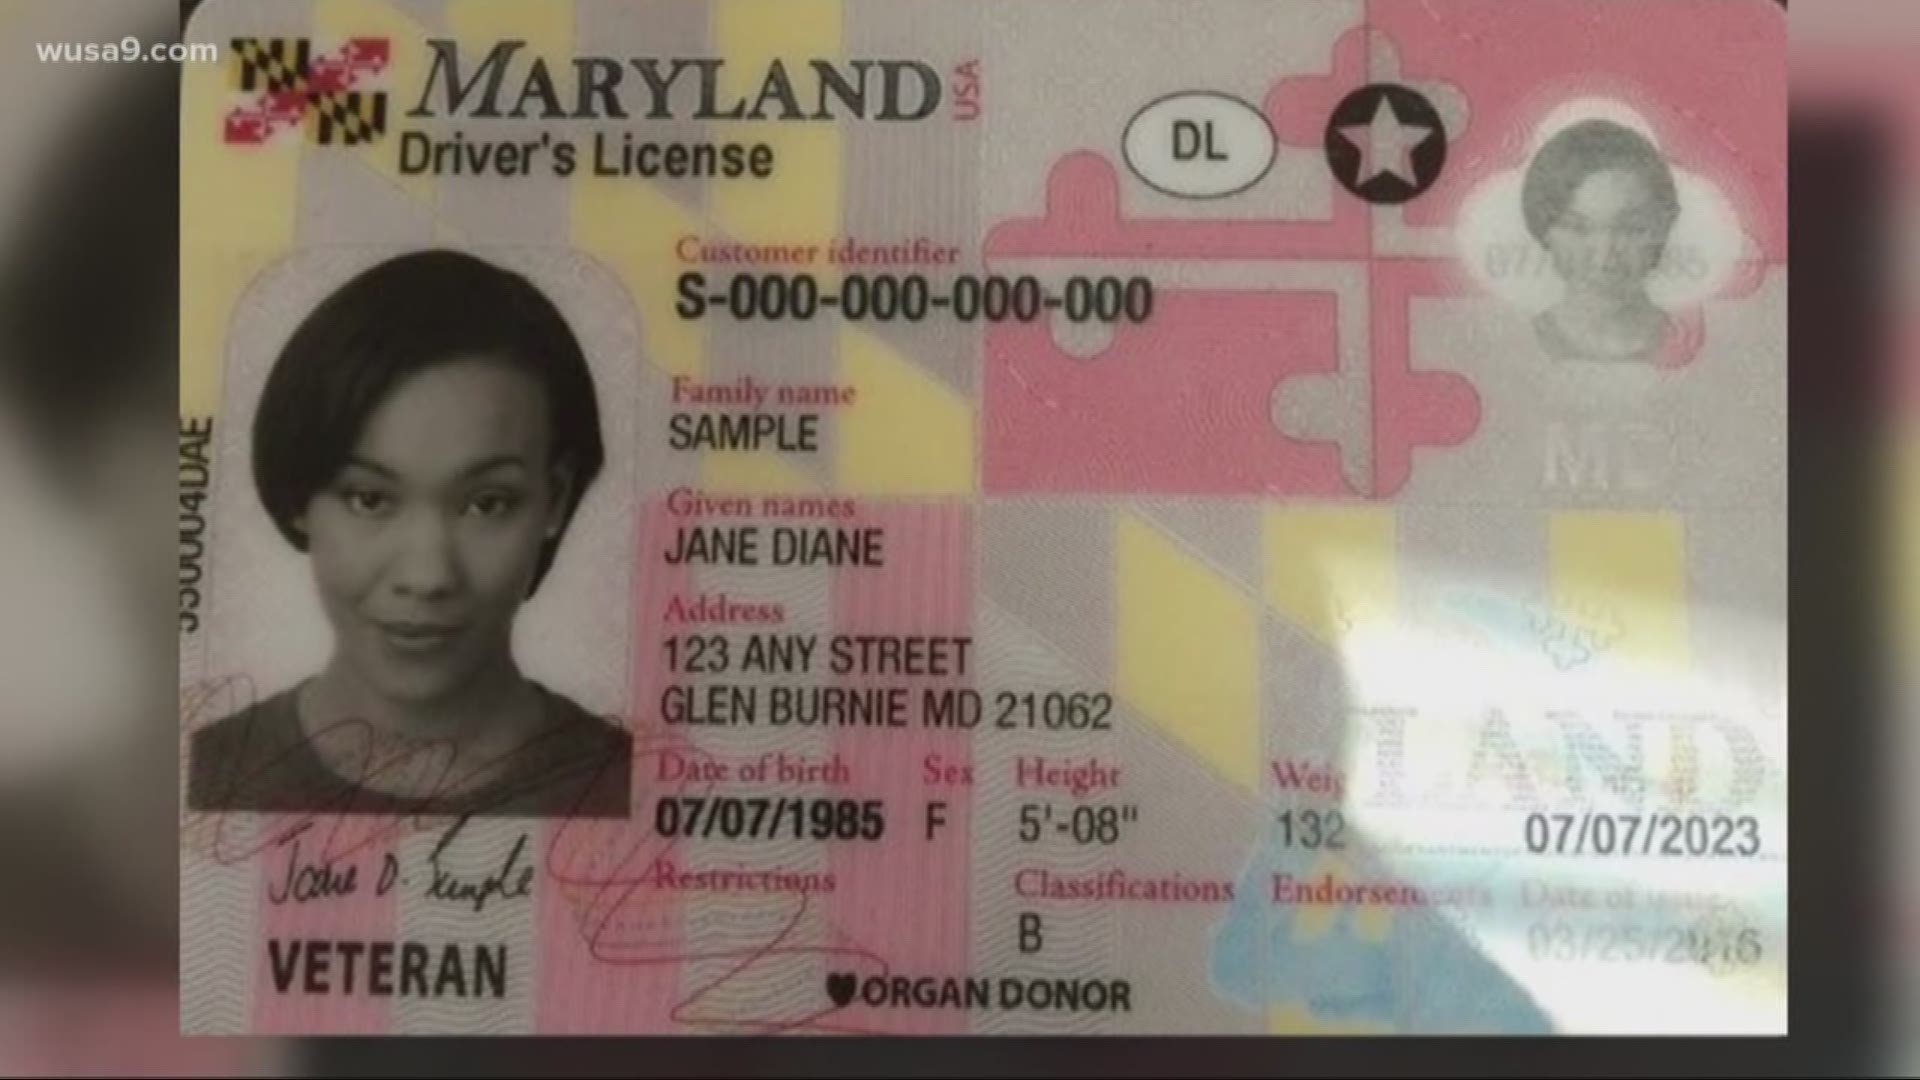 The federal government has once again approved Maryland's process of issuing those federally-compliant REAL ID's. The process undergoes review every few years.